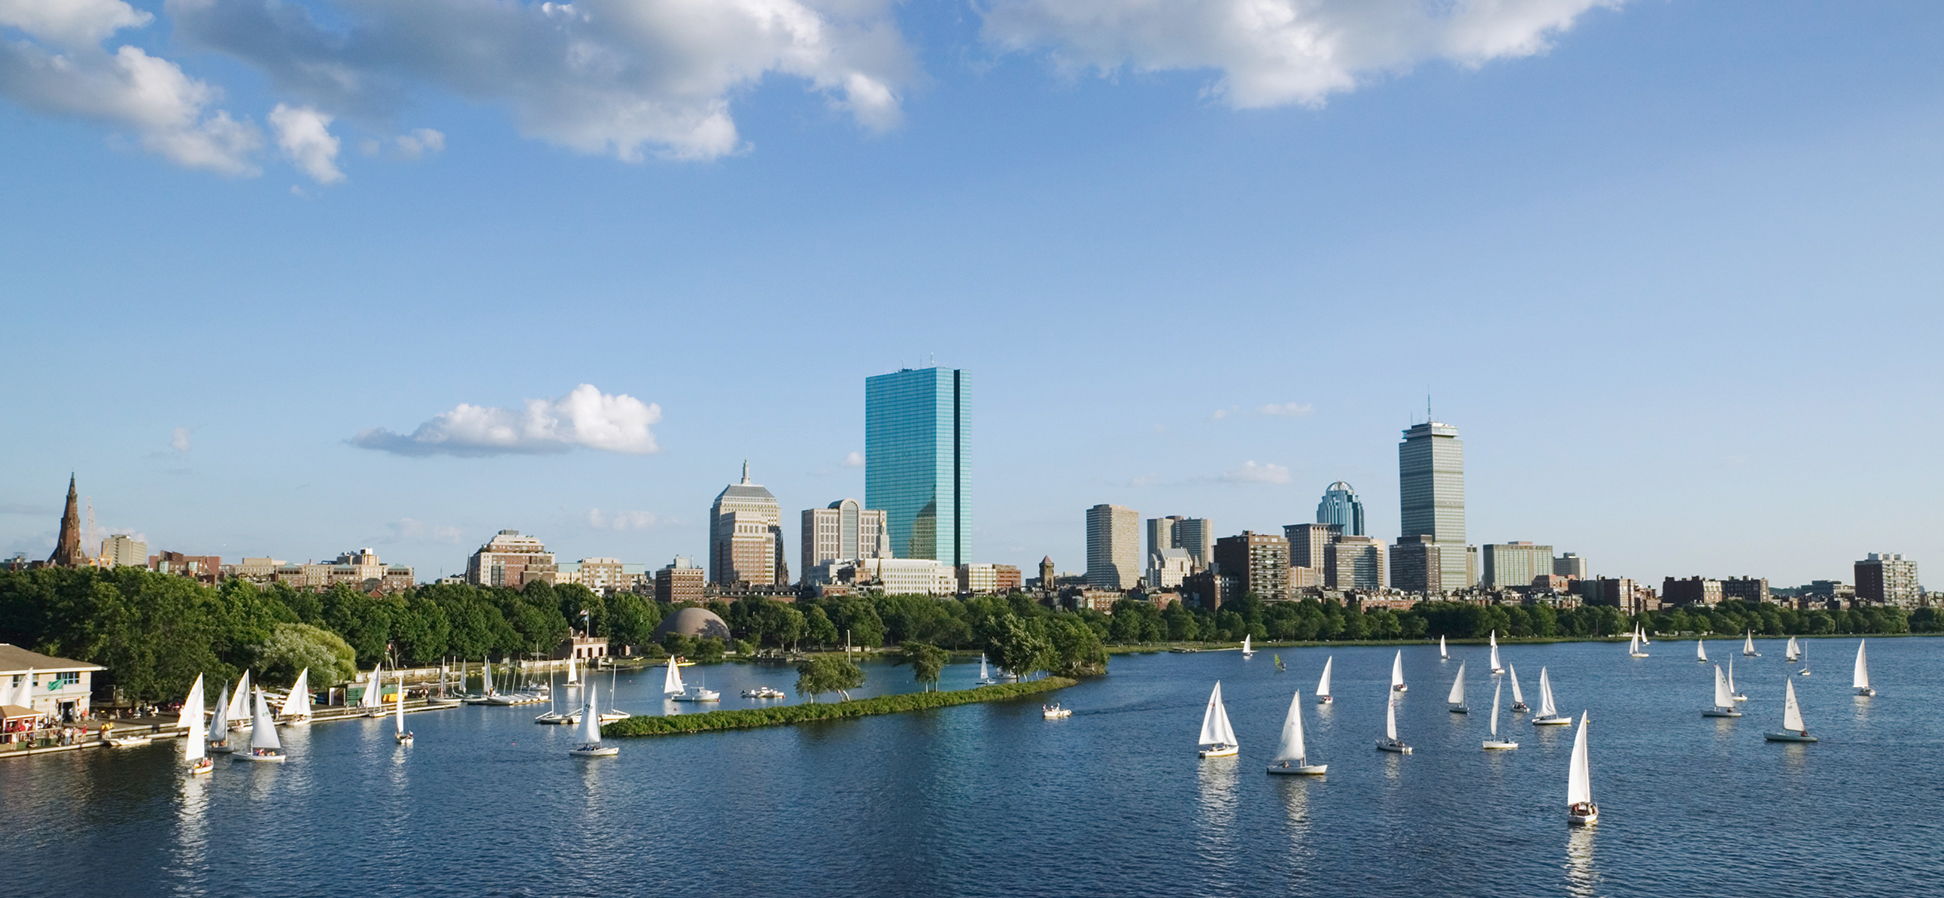 SpotHero Summer Picks: Our Top 9 Things to do in Boston this Summer